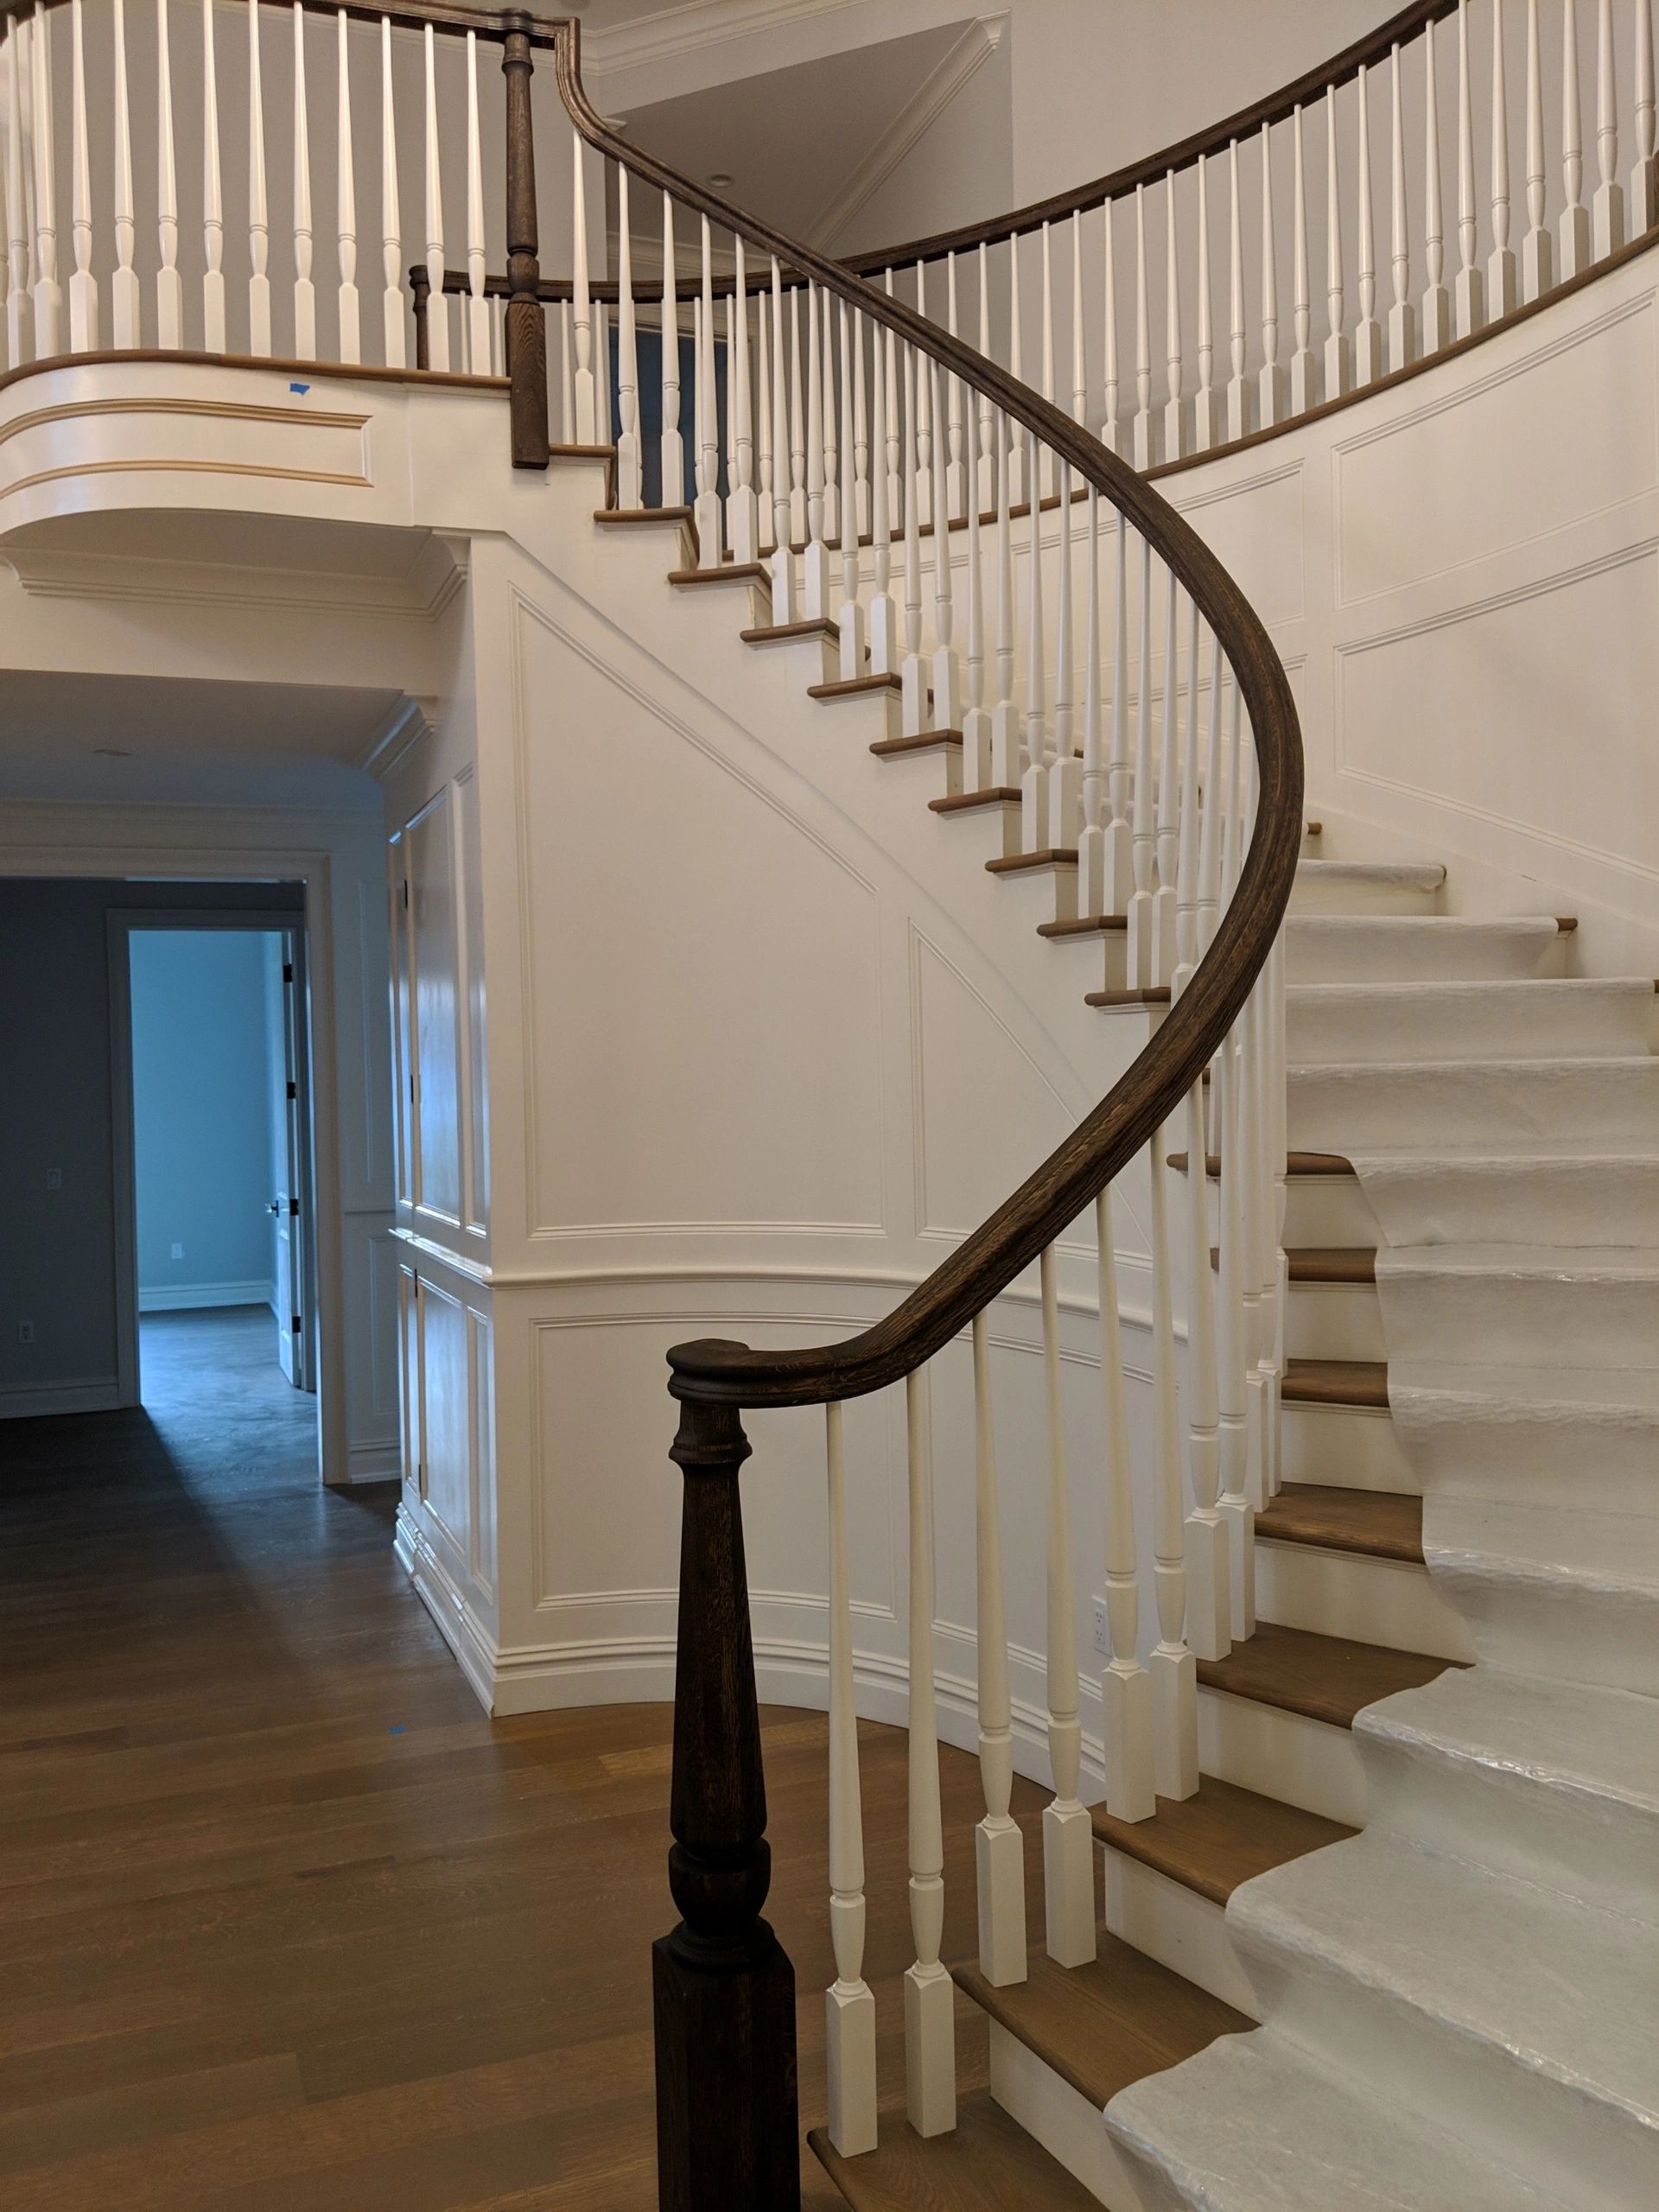 A staircase with our wood railings in Colonia, NJ